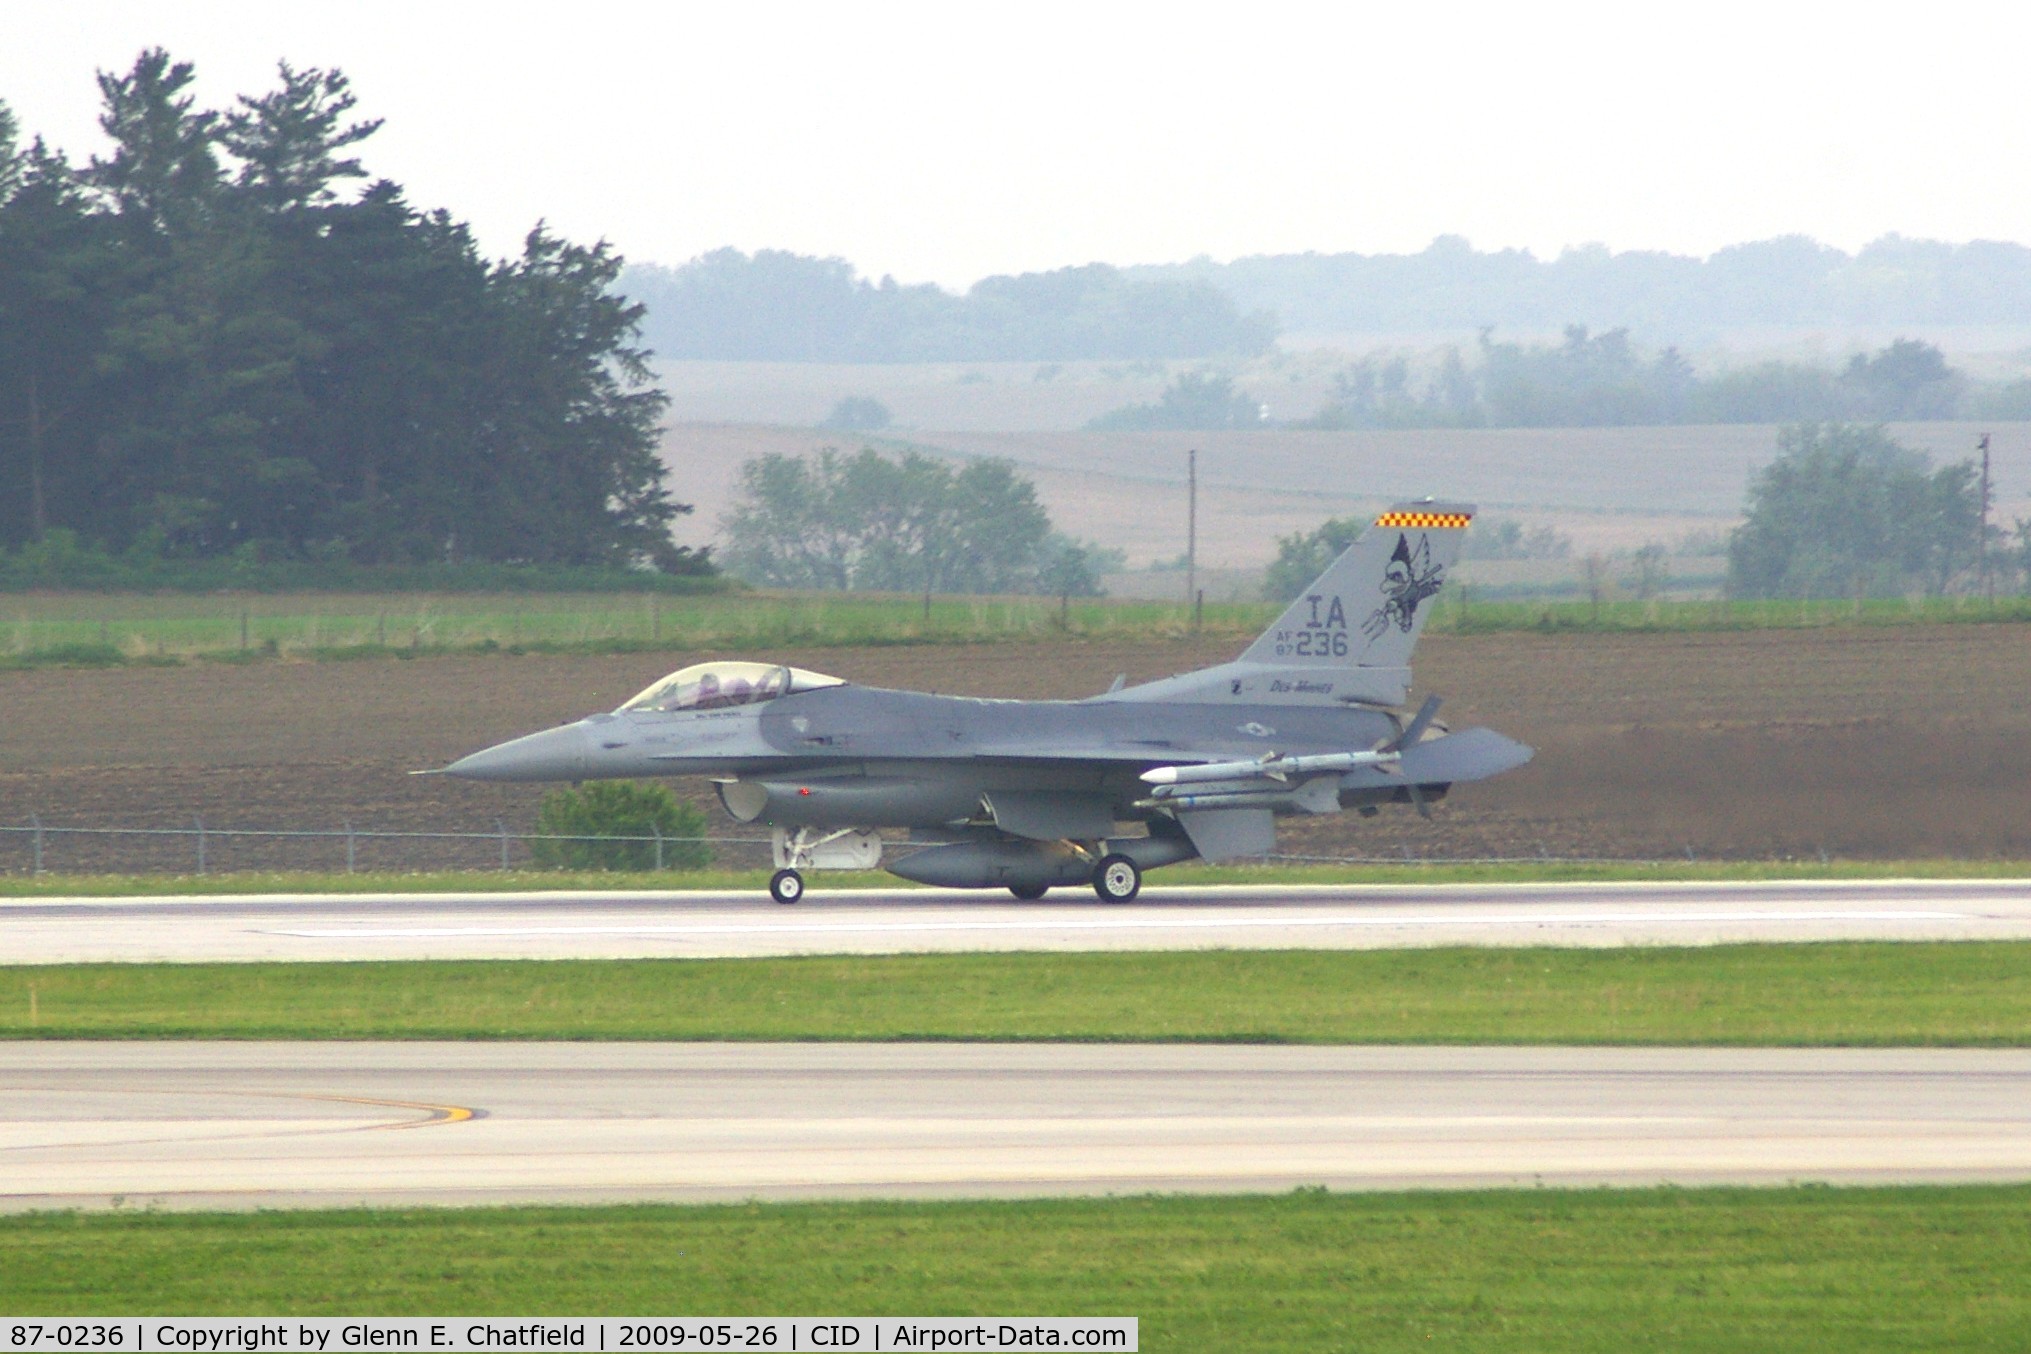 87-0236, 1987 General Dynamics F-16C Fighting Falcon C/N 5C-497, Cyclone 22 landing runway 9.  Diverted from DSM due to weather there.